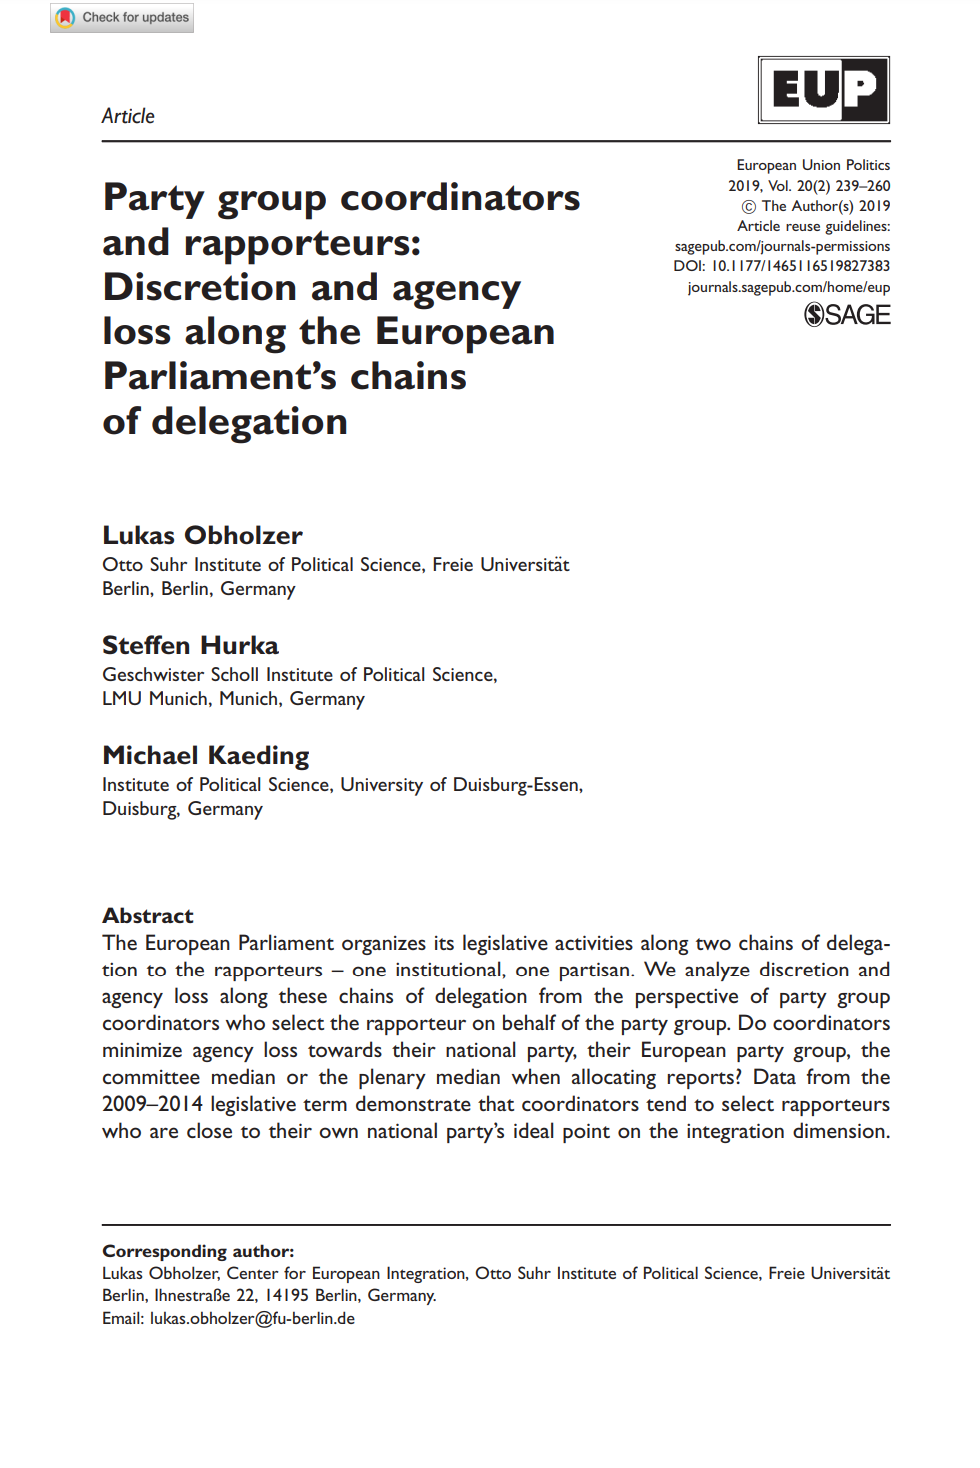 New Publication: Party group coordinators and rapporteurs: Discretion and agency loss along the European Parliament’s chains of delegation